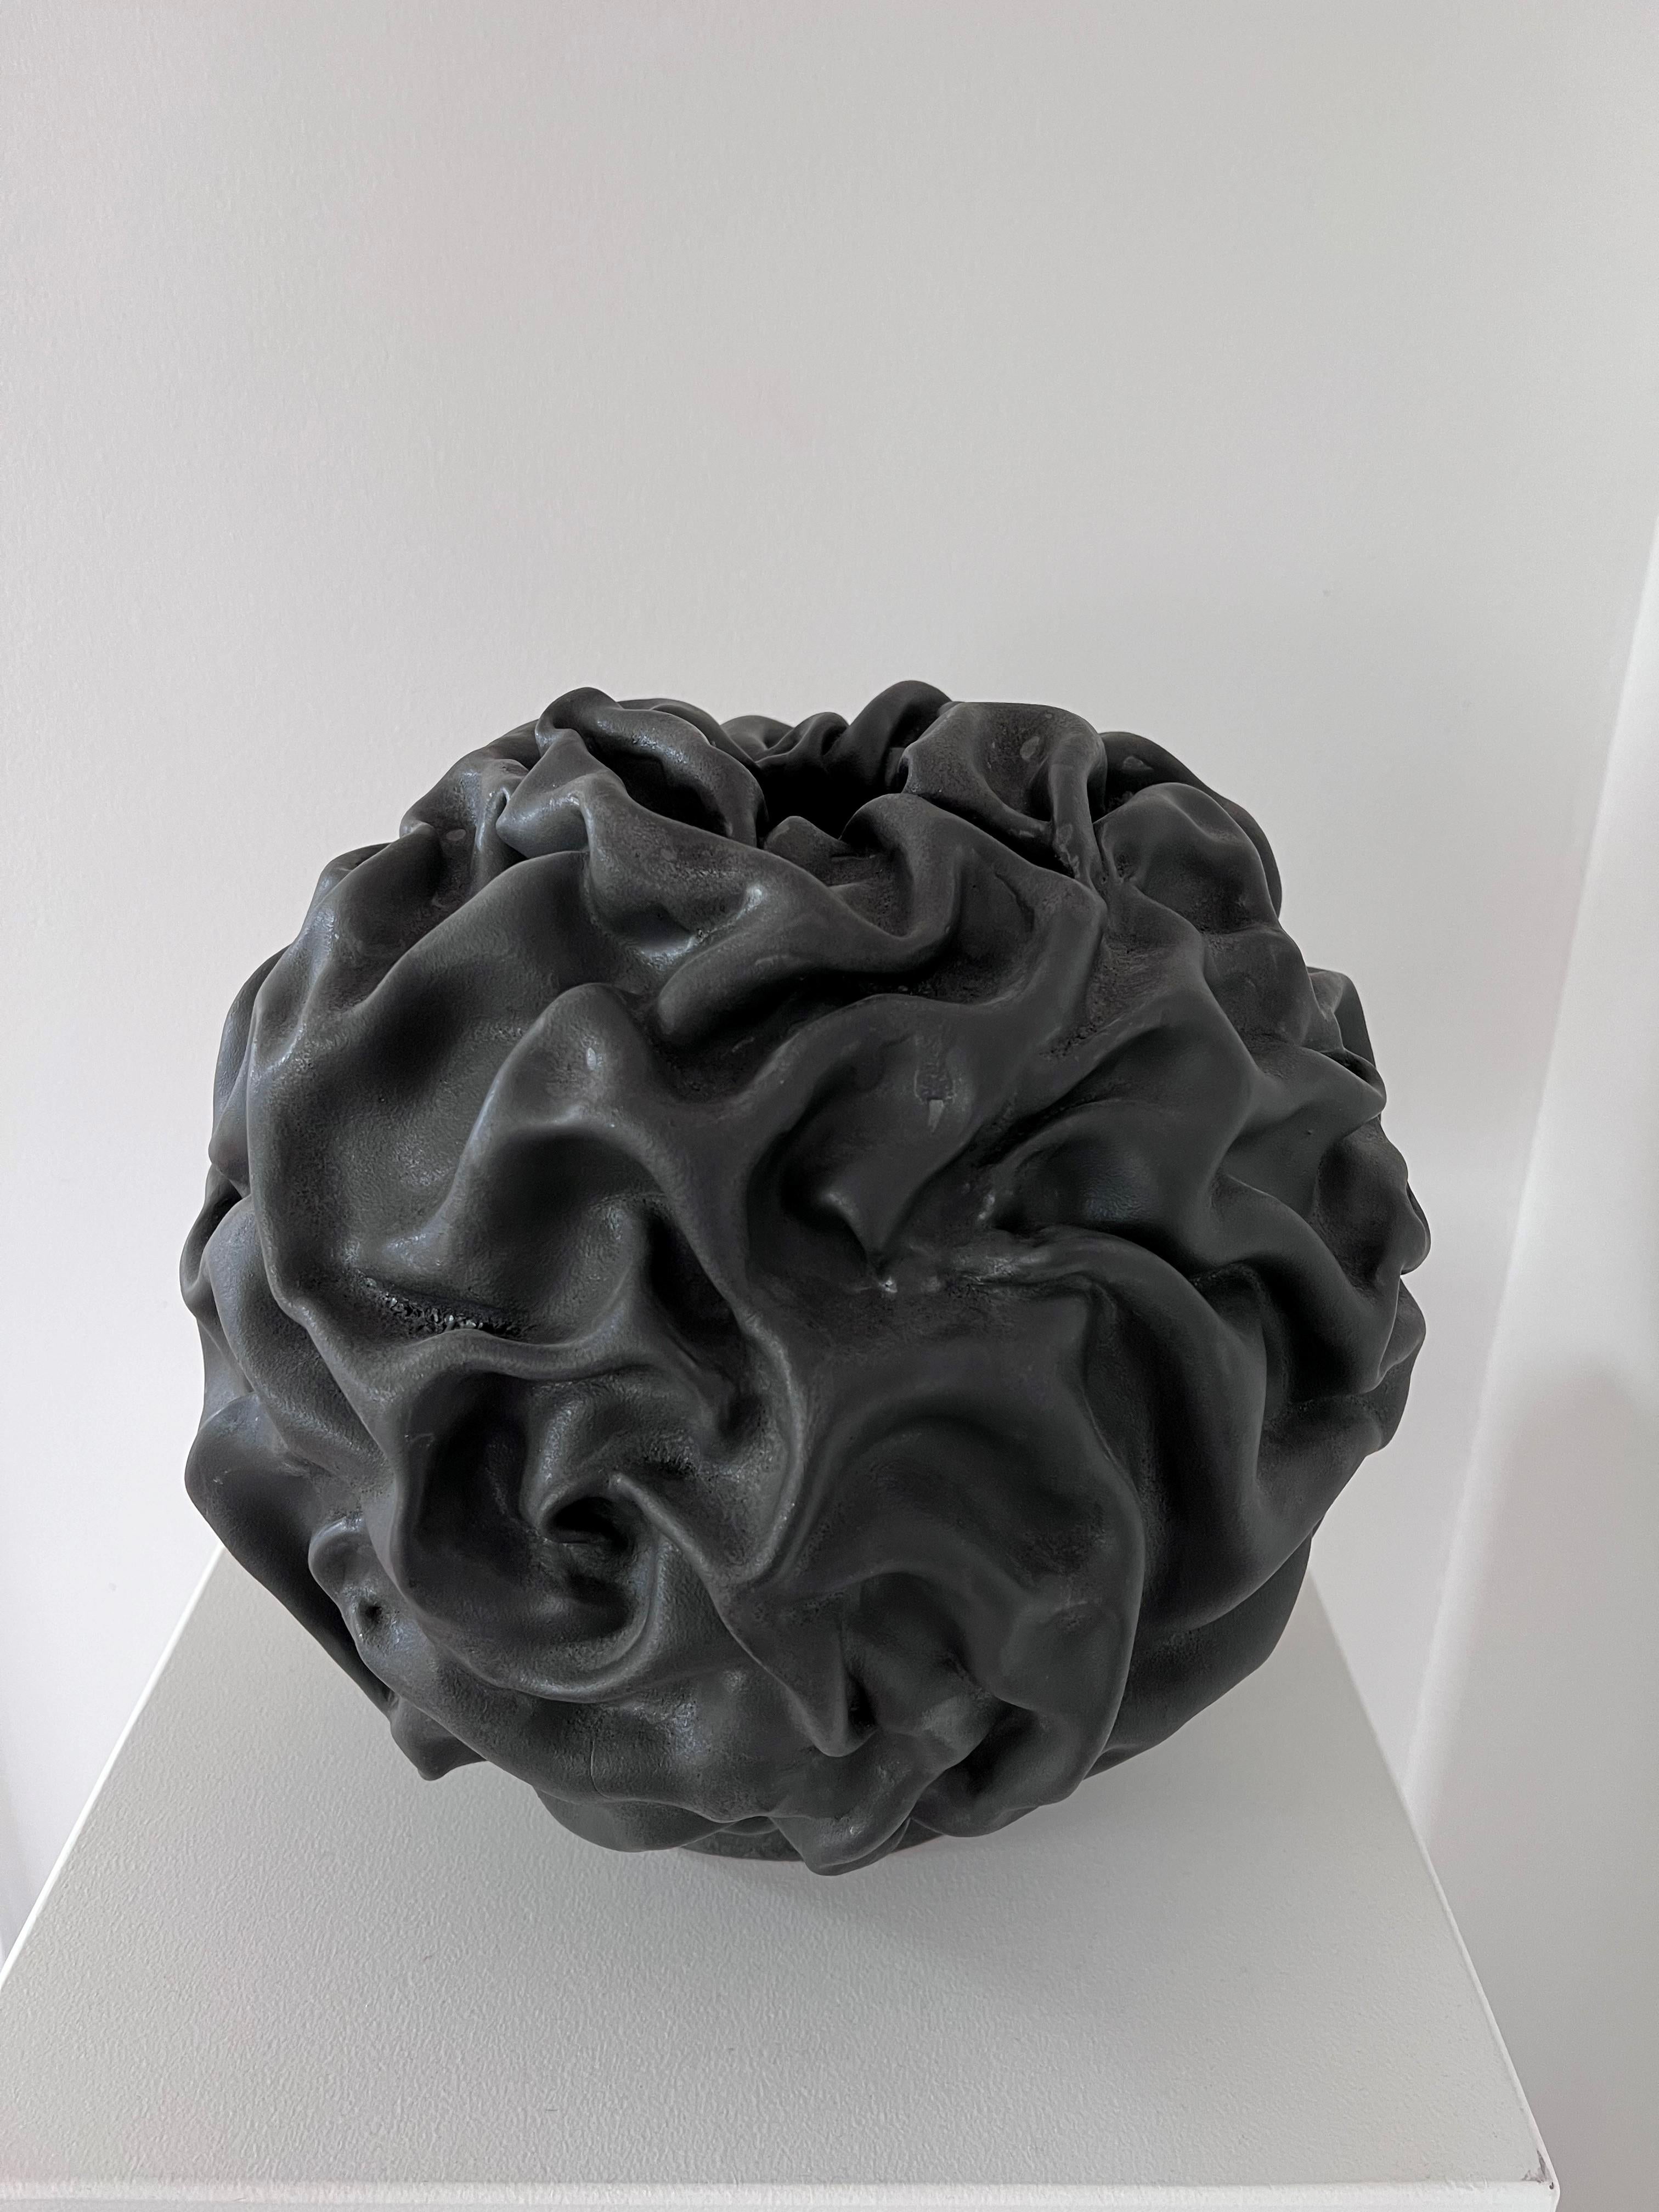 Morel sculpture III by Sophie Rogers
Dimensions: W 33 x H 31 cm
Materials: Ceramic, glaze
Other glaze colors available.

Inspired by the forms of nature, the origin comes from the mushroom Morel`s expression. A game with shadows and light. The